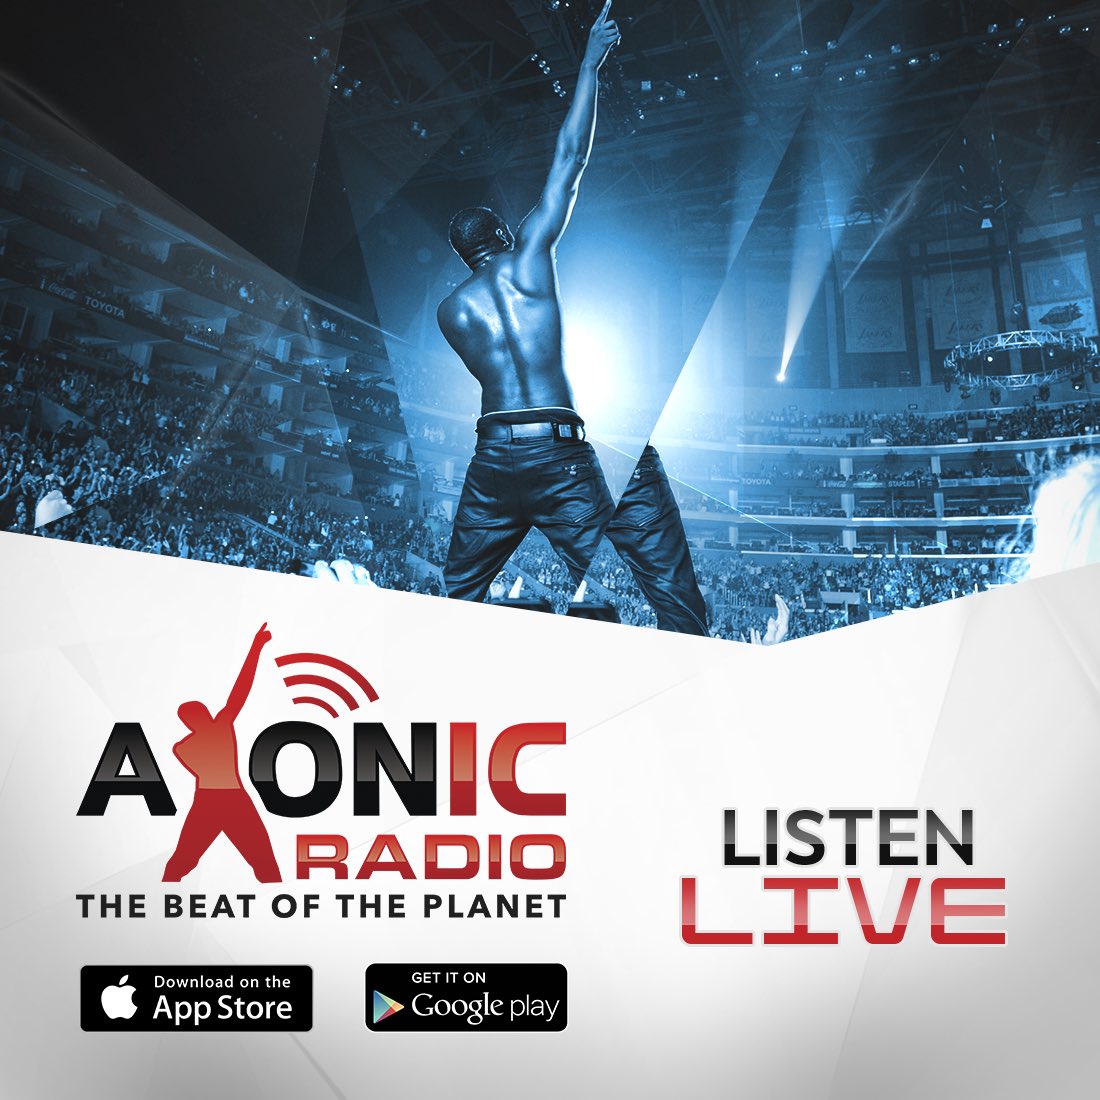 AKONIC RADIO streaming live at https://t.co/YuNDfFKjVL, get the akonic radio app on iTunes and Google play https://t.co/f4iuDIIxis